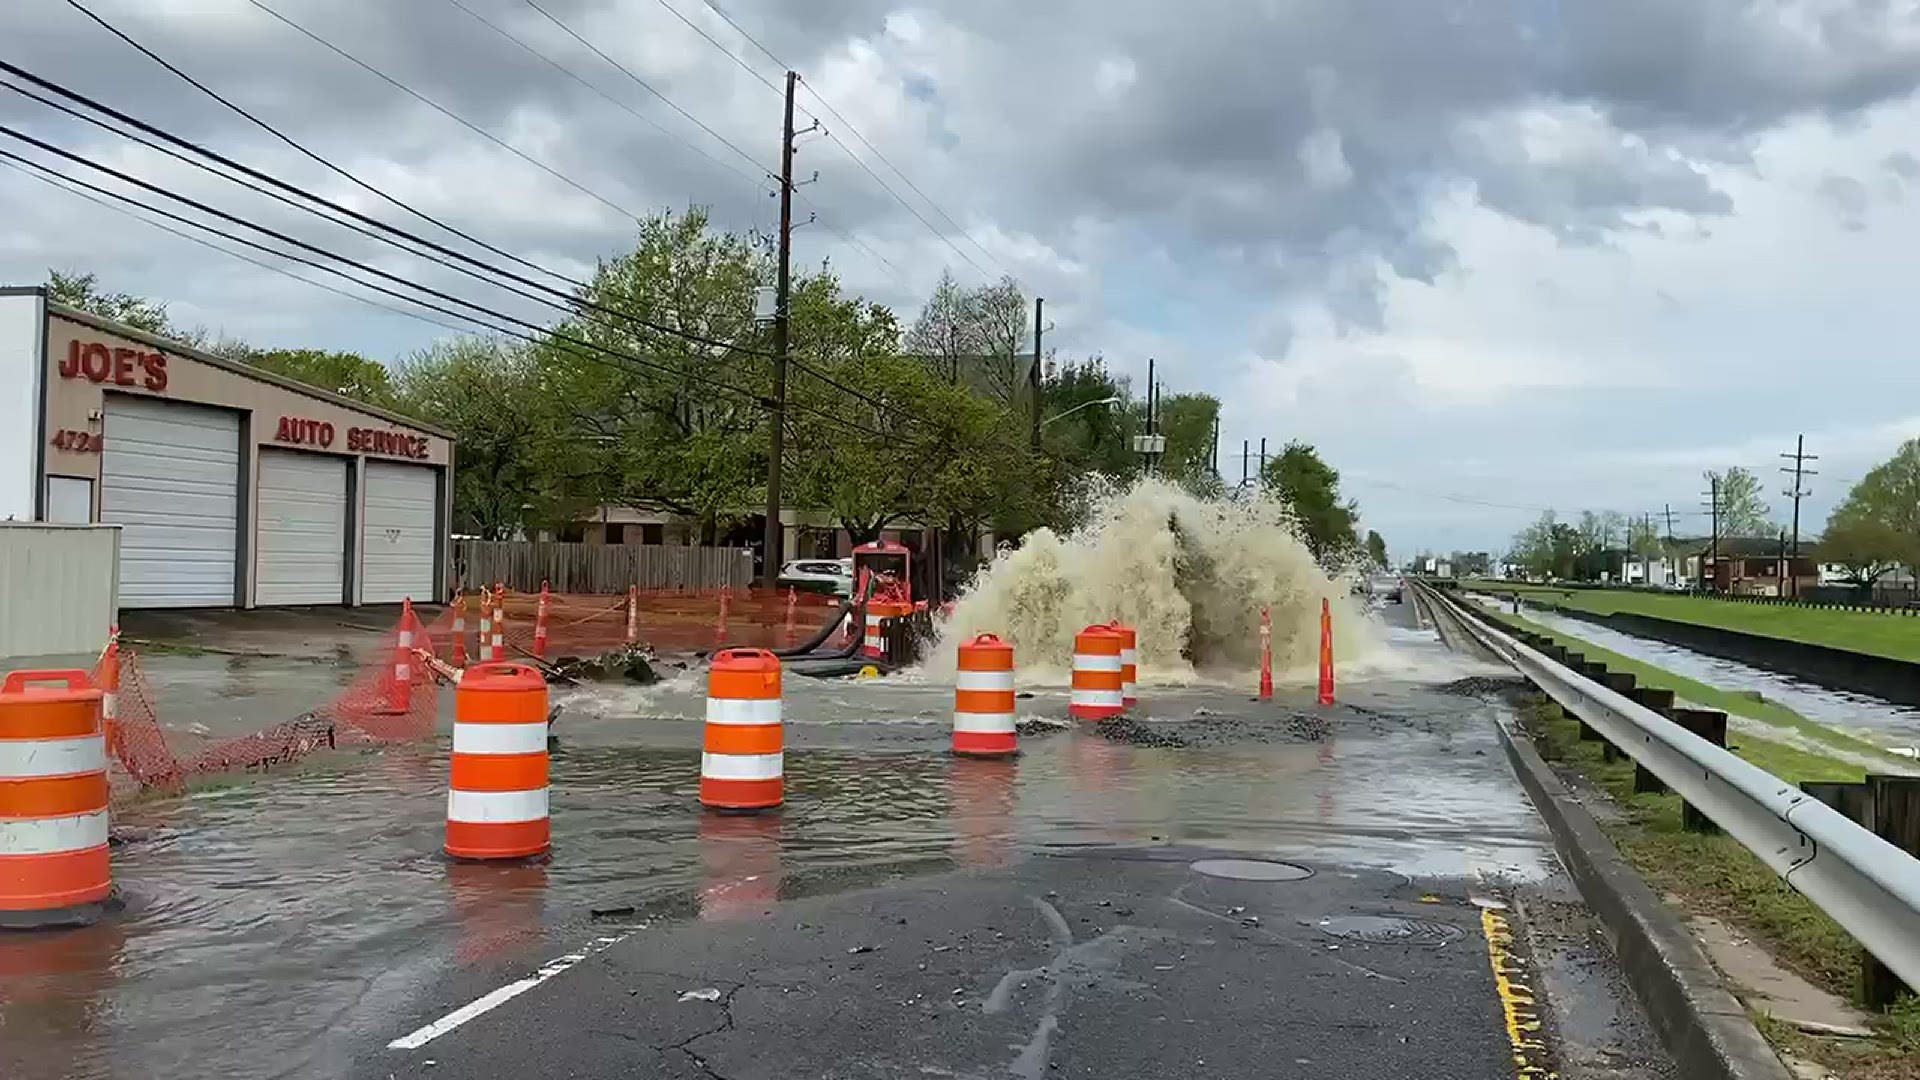 The video shows water shooting into the air and flooding the street around several businesses in Metairie on West Napoleon.  Video: Billy Brakel